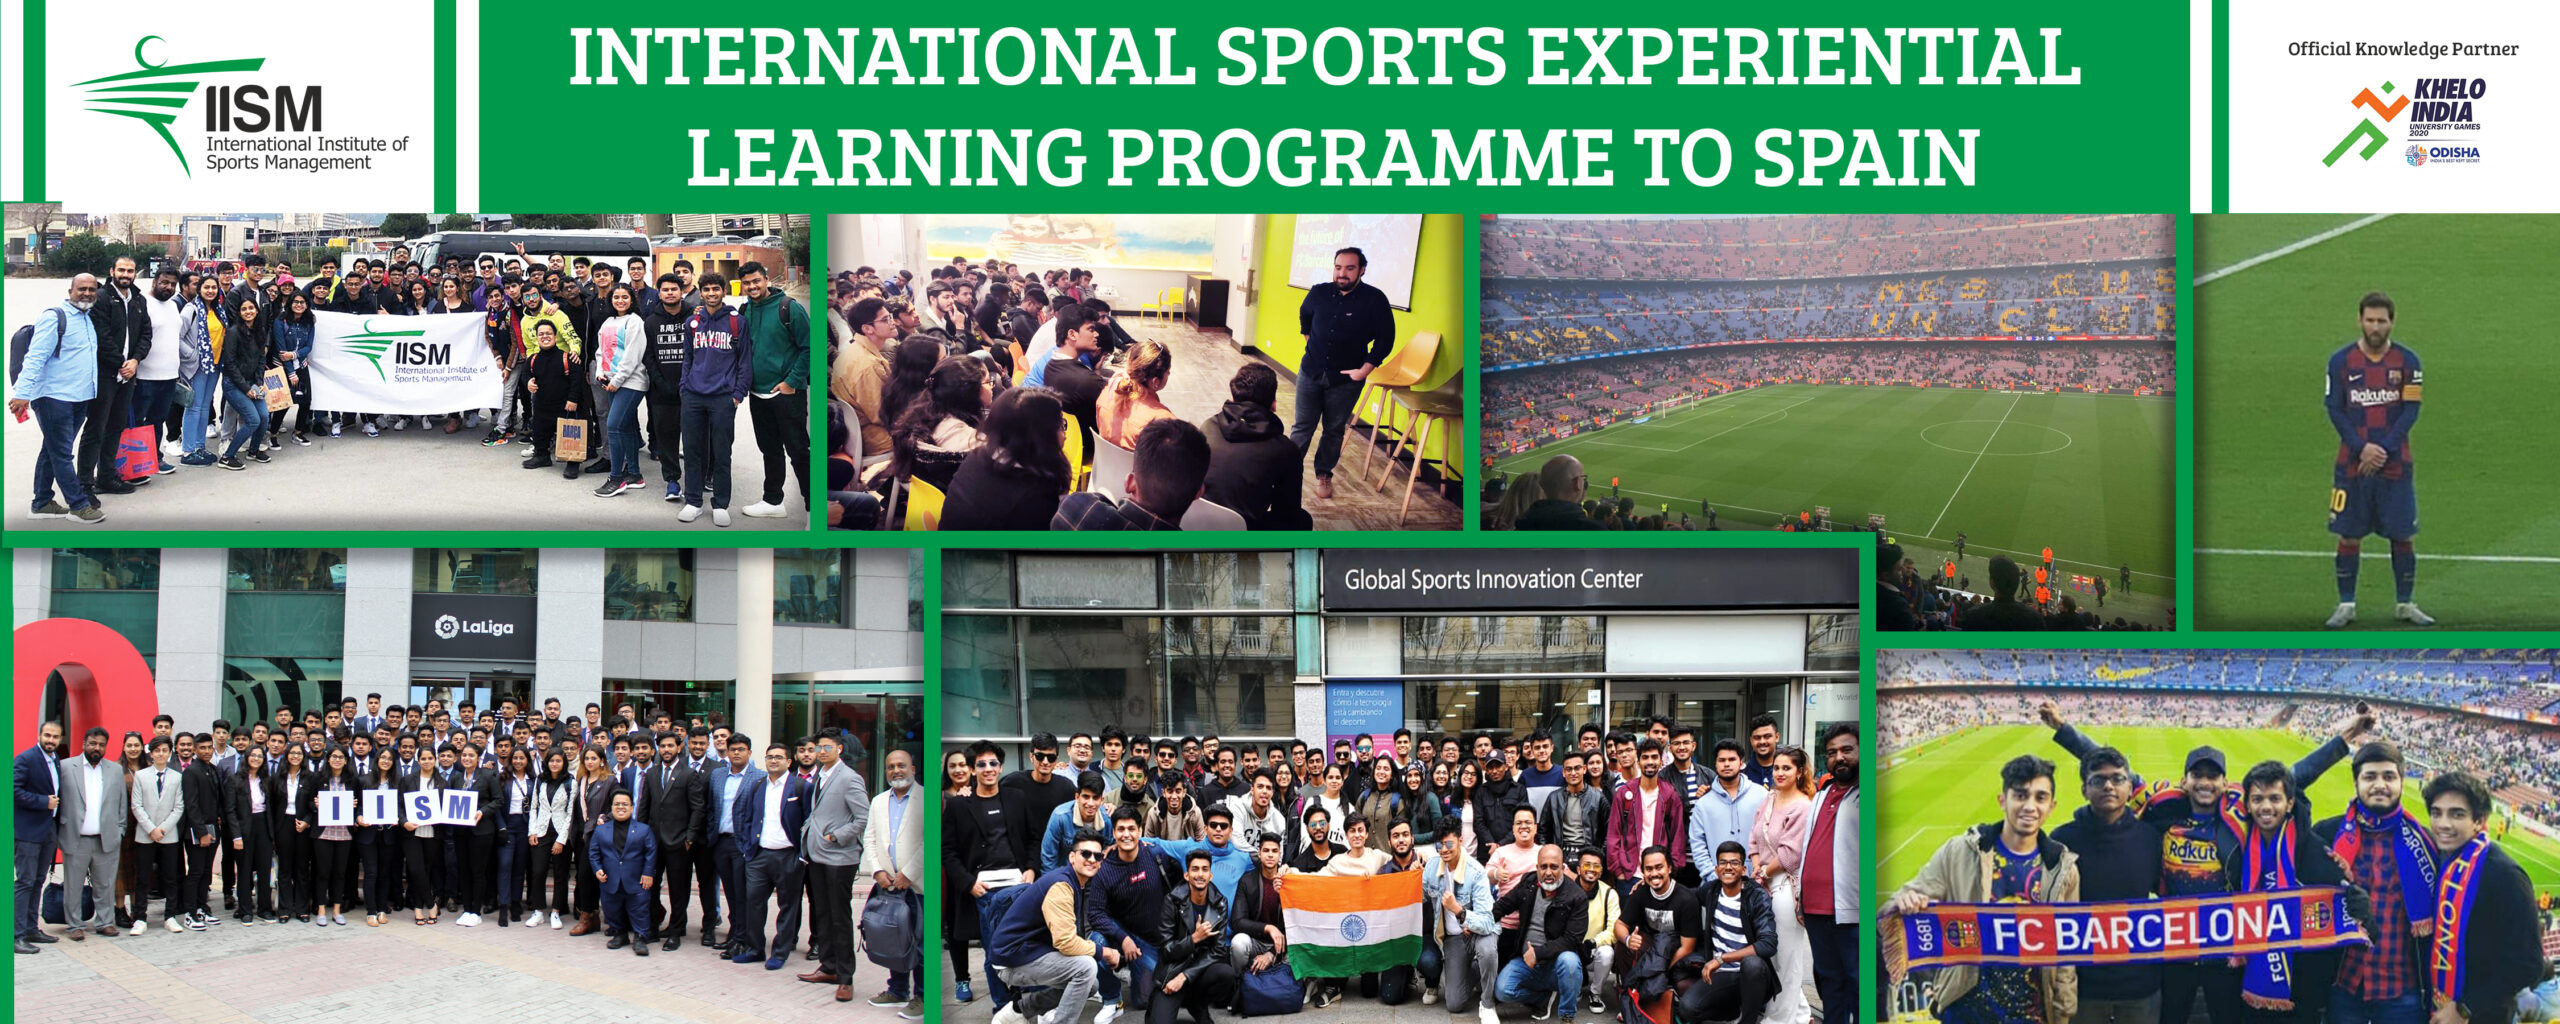 International Sports Experiential Learning Programme to Spain